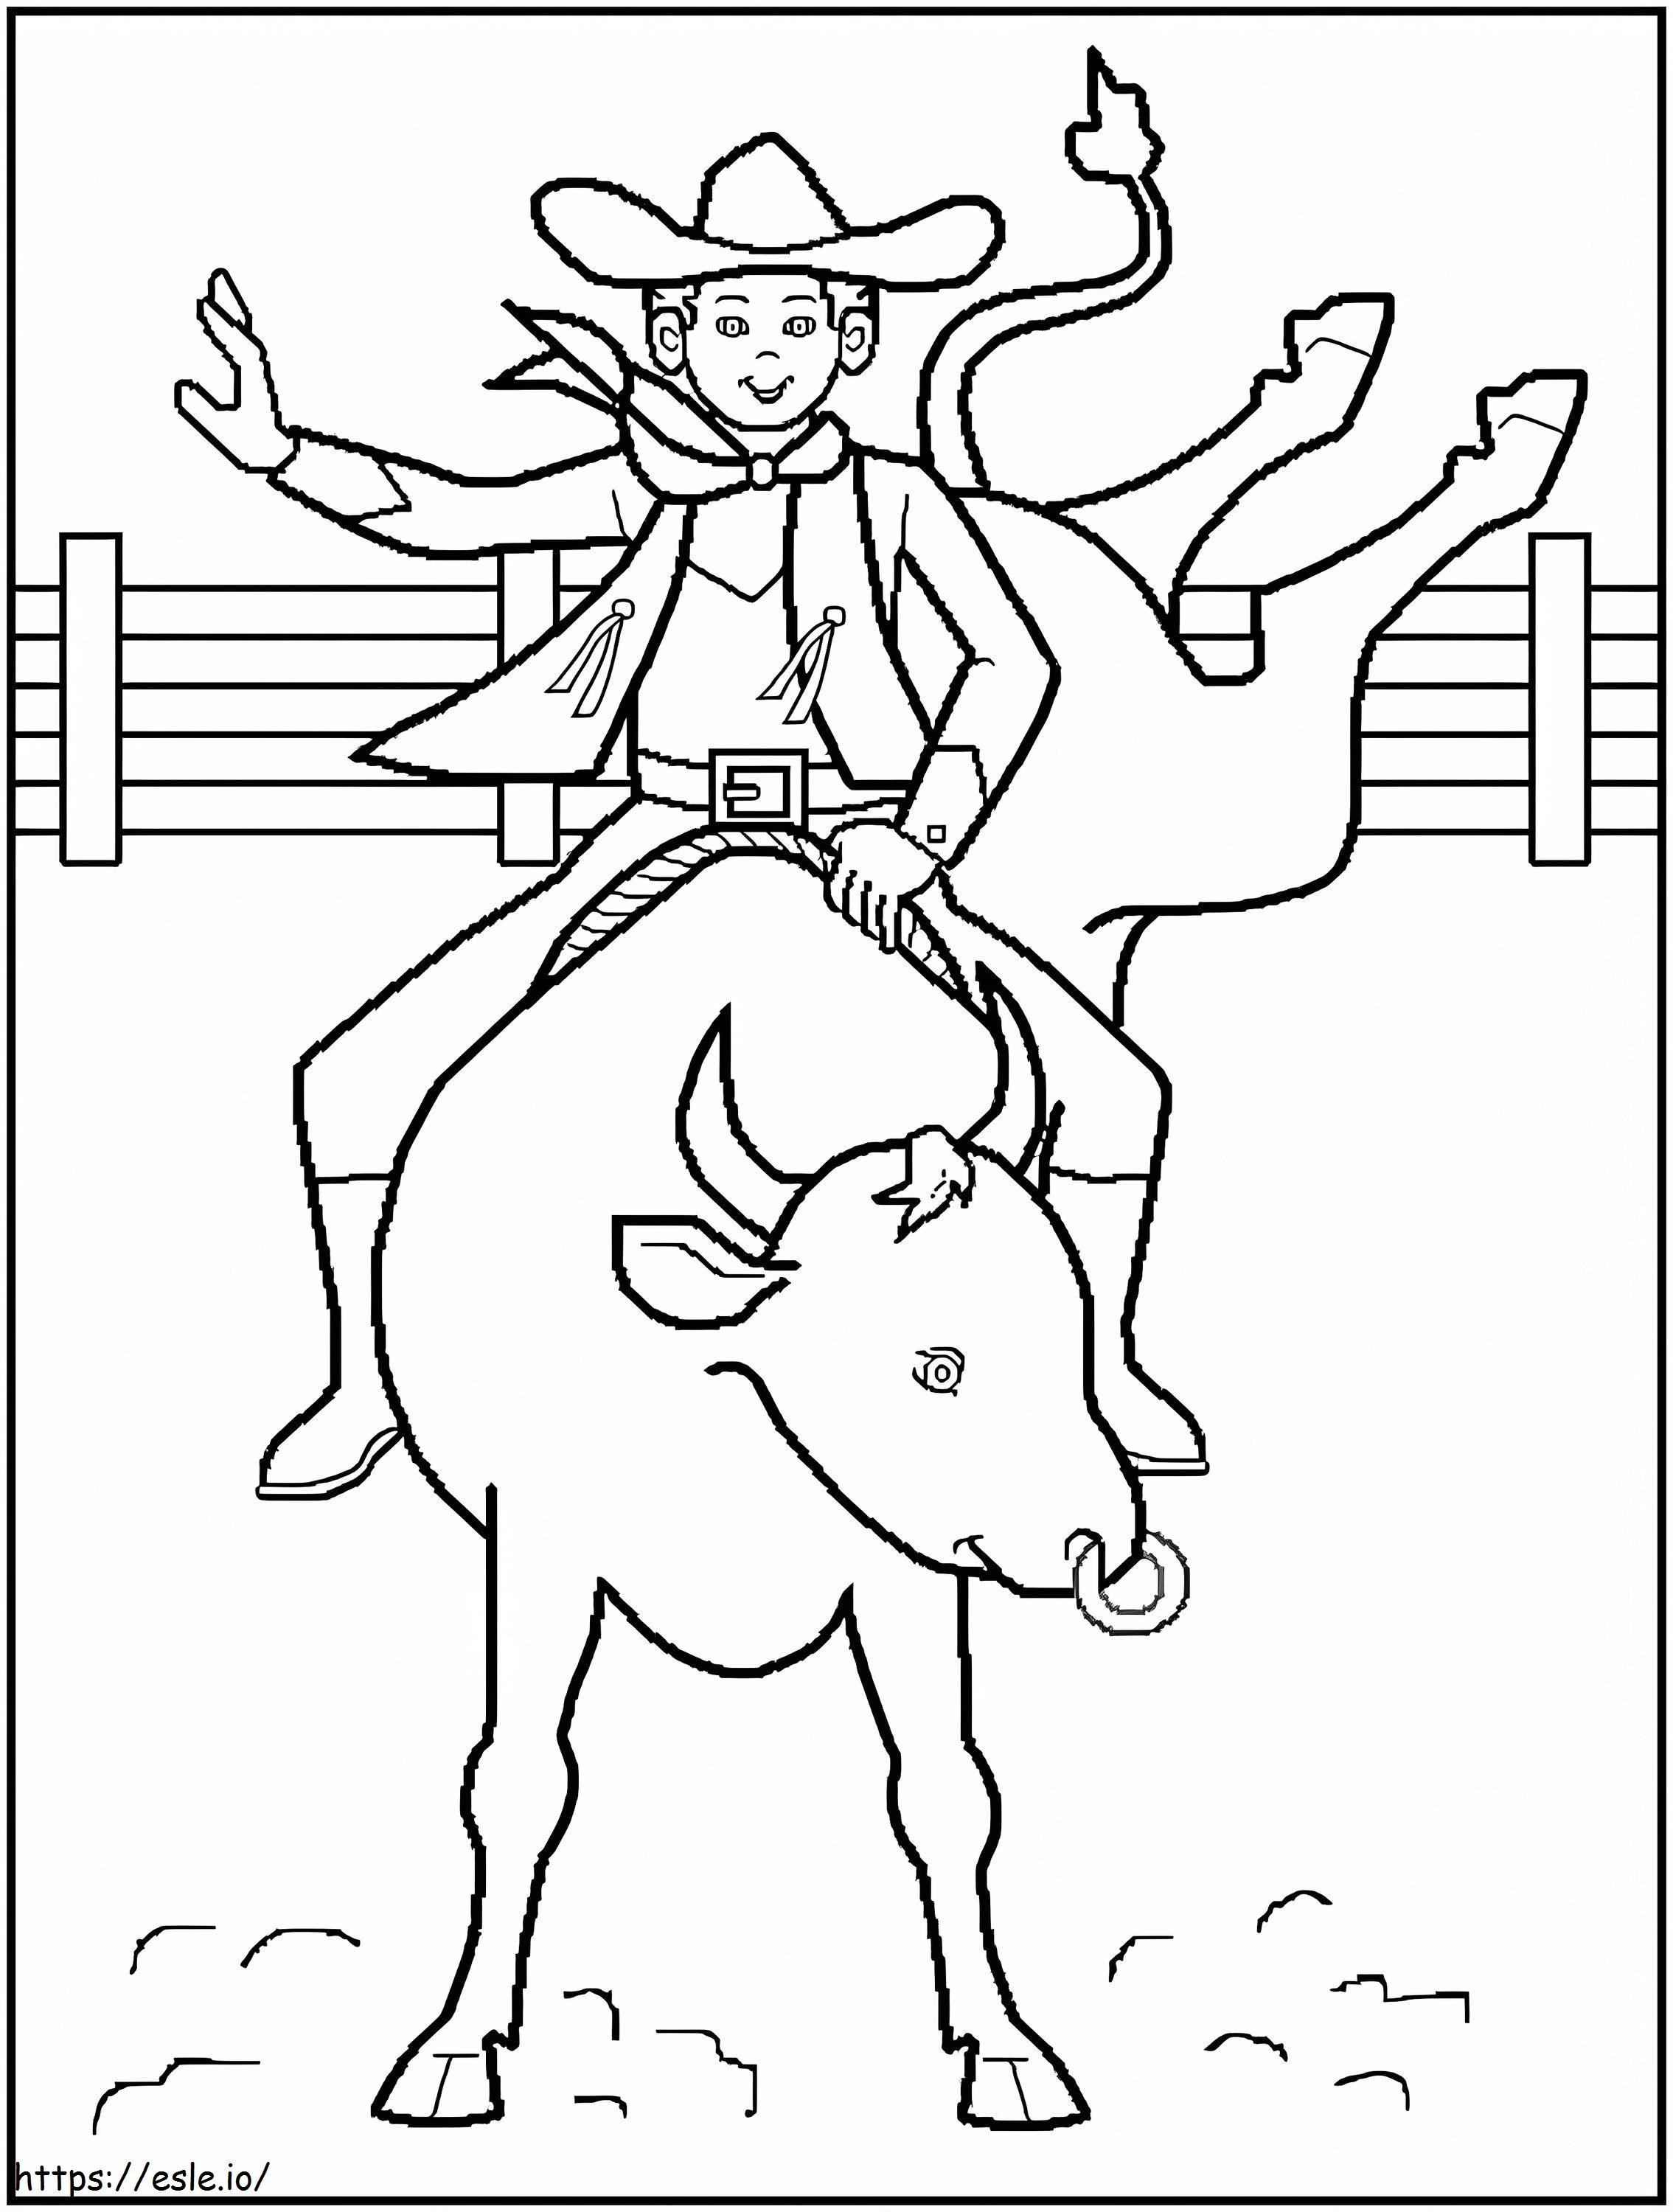 Smiling Cowboy Riding Horse coloring page